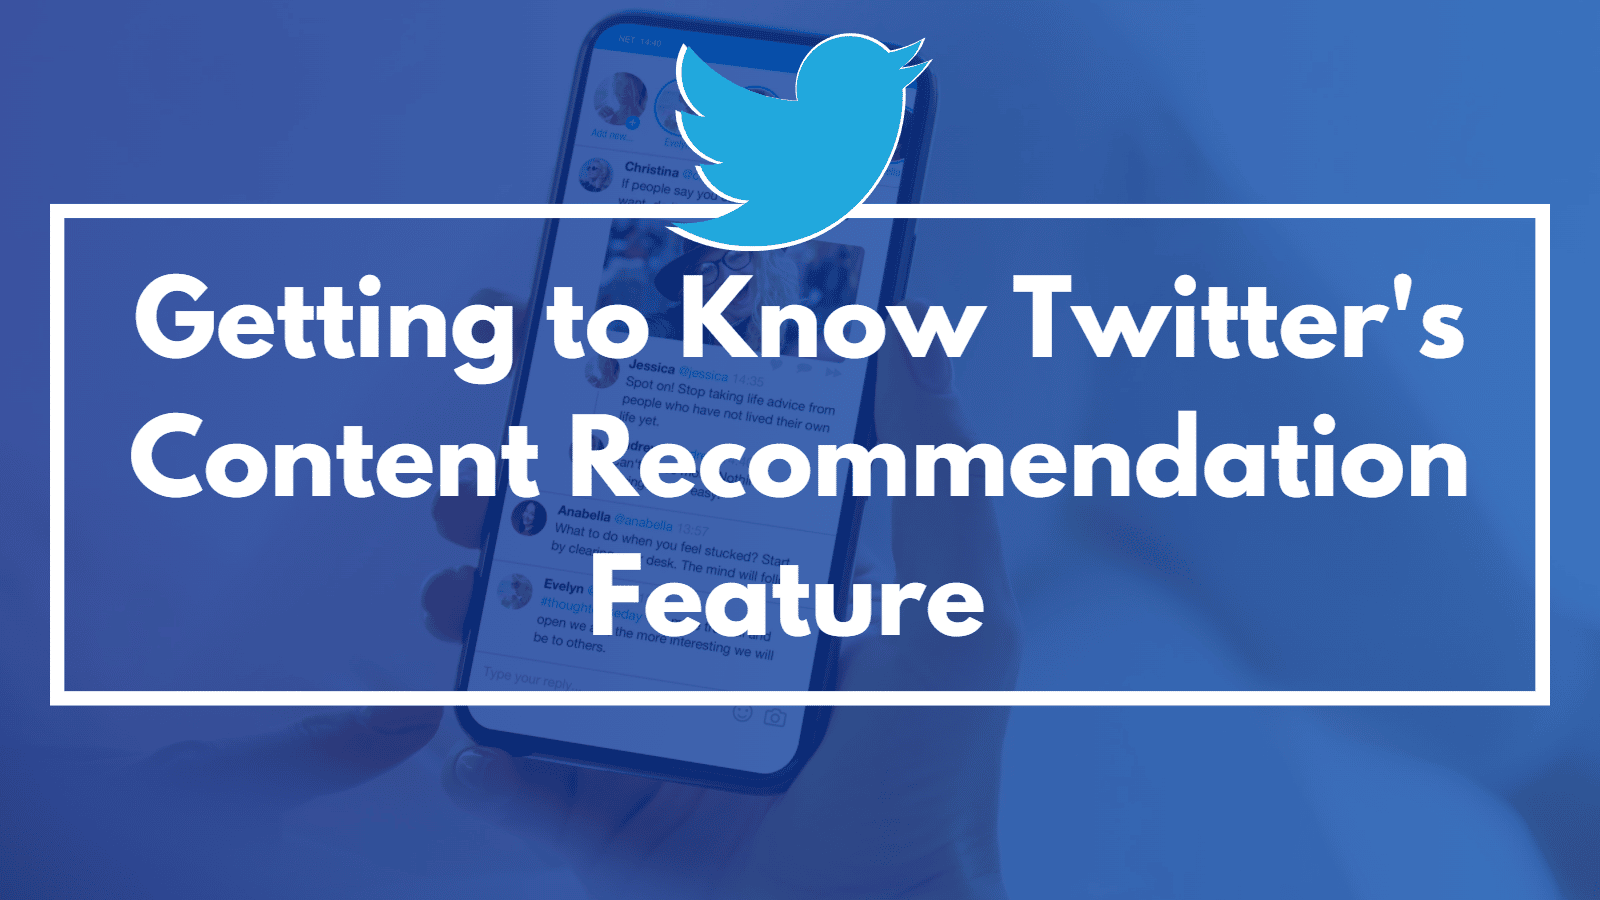 Getting to Know Twitter's Content Recommendation Feature